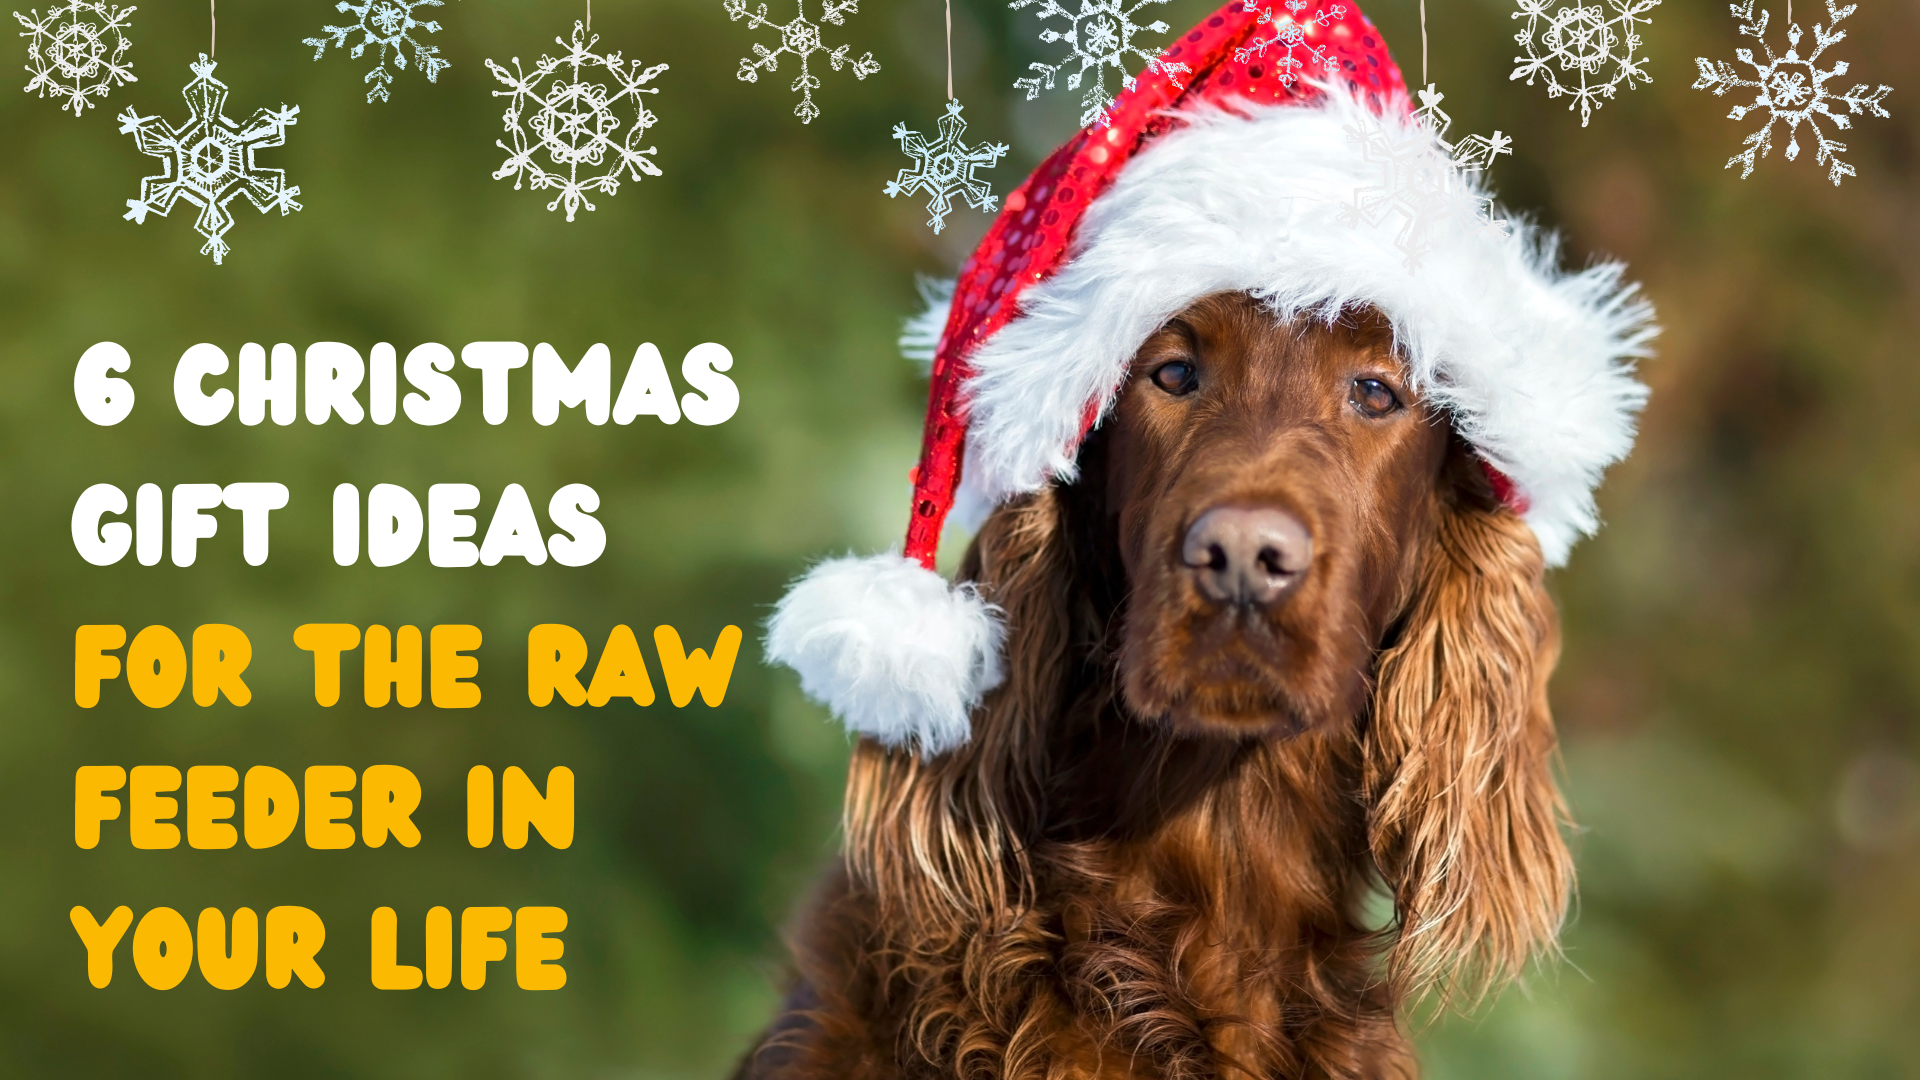 6 Christmas gift ideas for the raw feeder